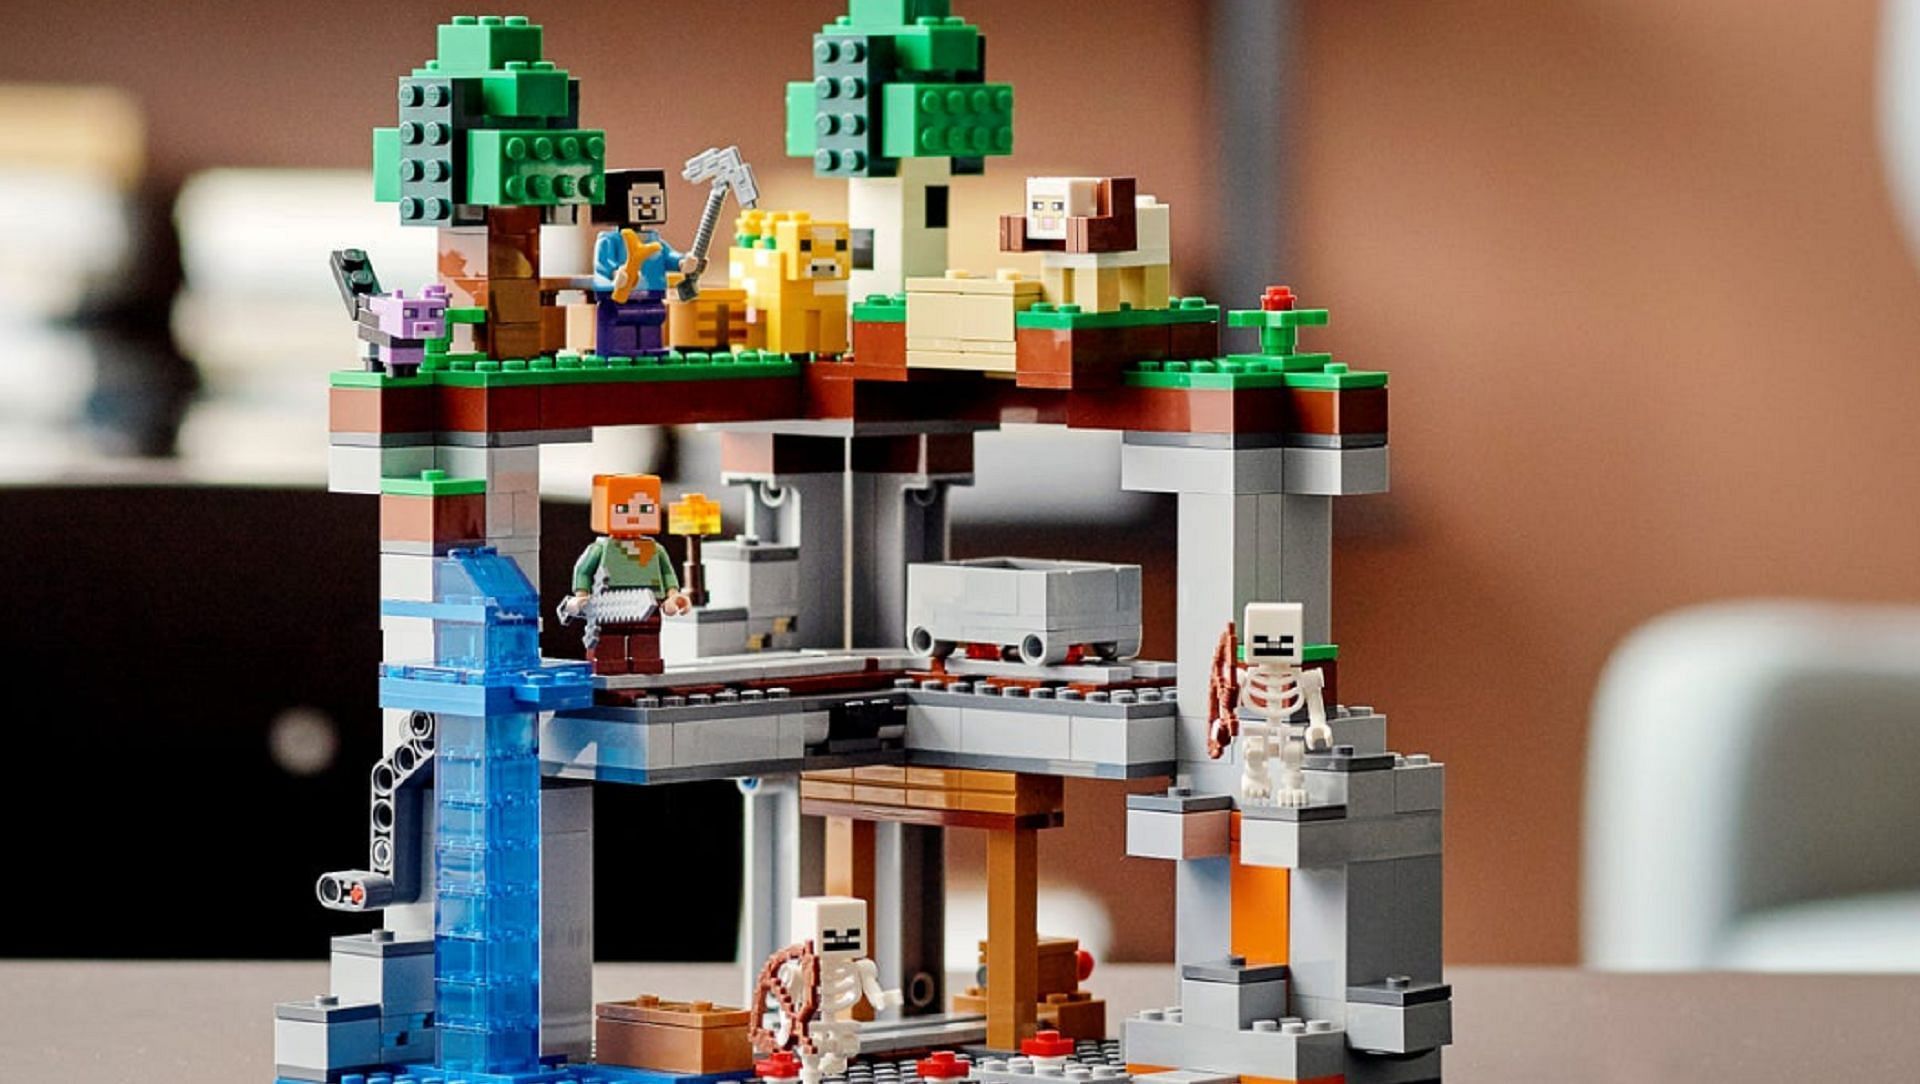 The First Adventure is a highly-interactive Lego build that begs creativity (Image via Mojang/Lego)